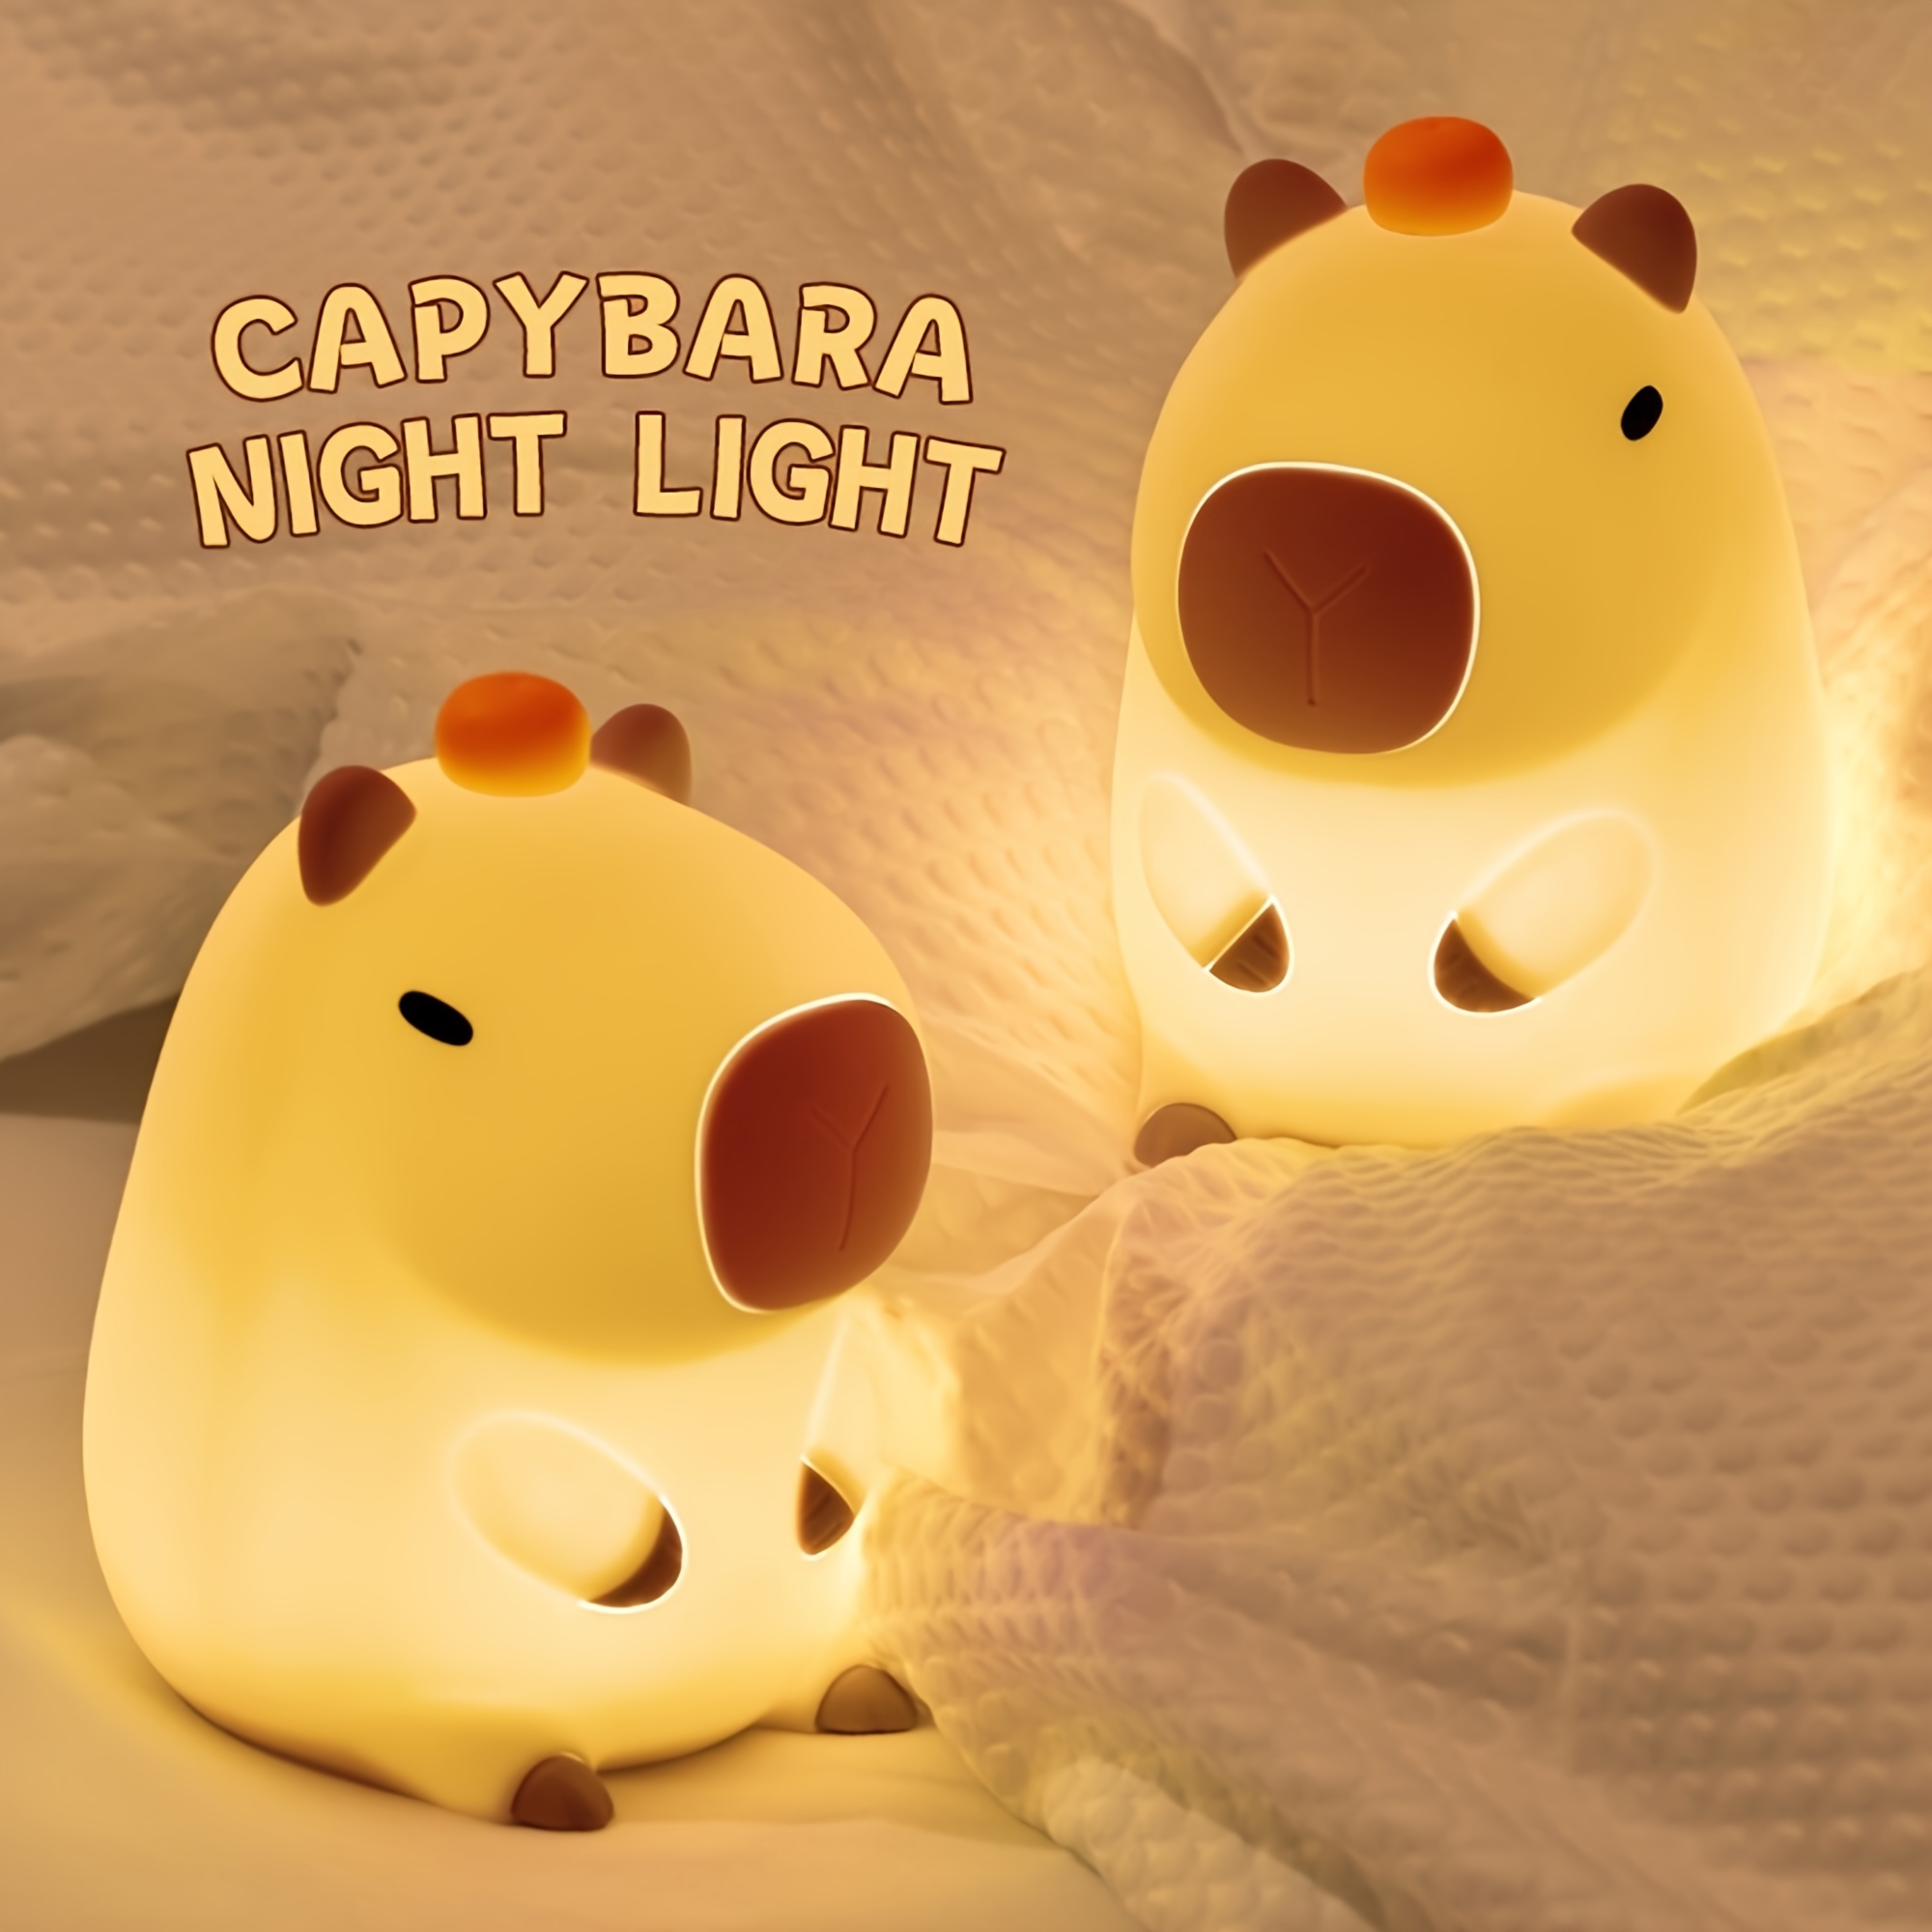 

plastic Shade" Capybara Night Light With Orange Head - Usb Rechargeable, Touch Control, Adjustable Brightness Bedroom Lamp - Perfect Birthday Or Christmas Gift